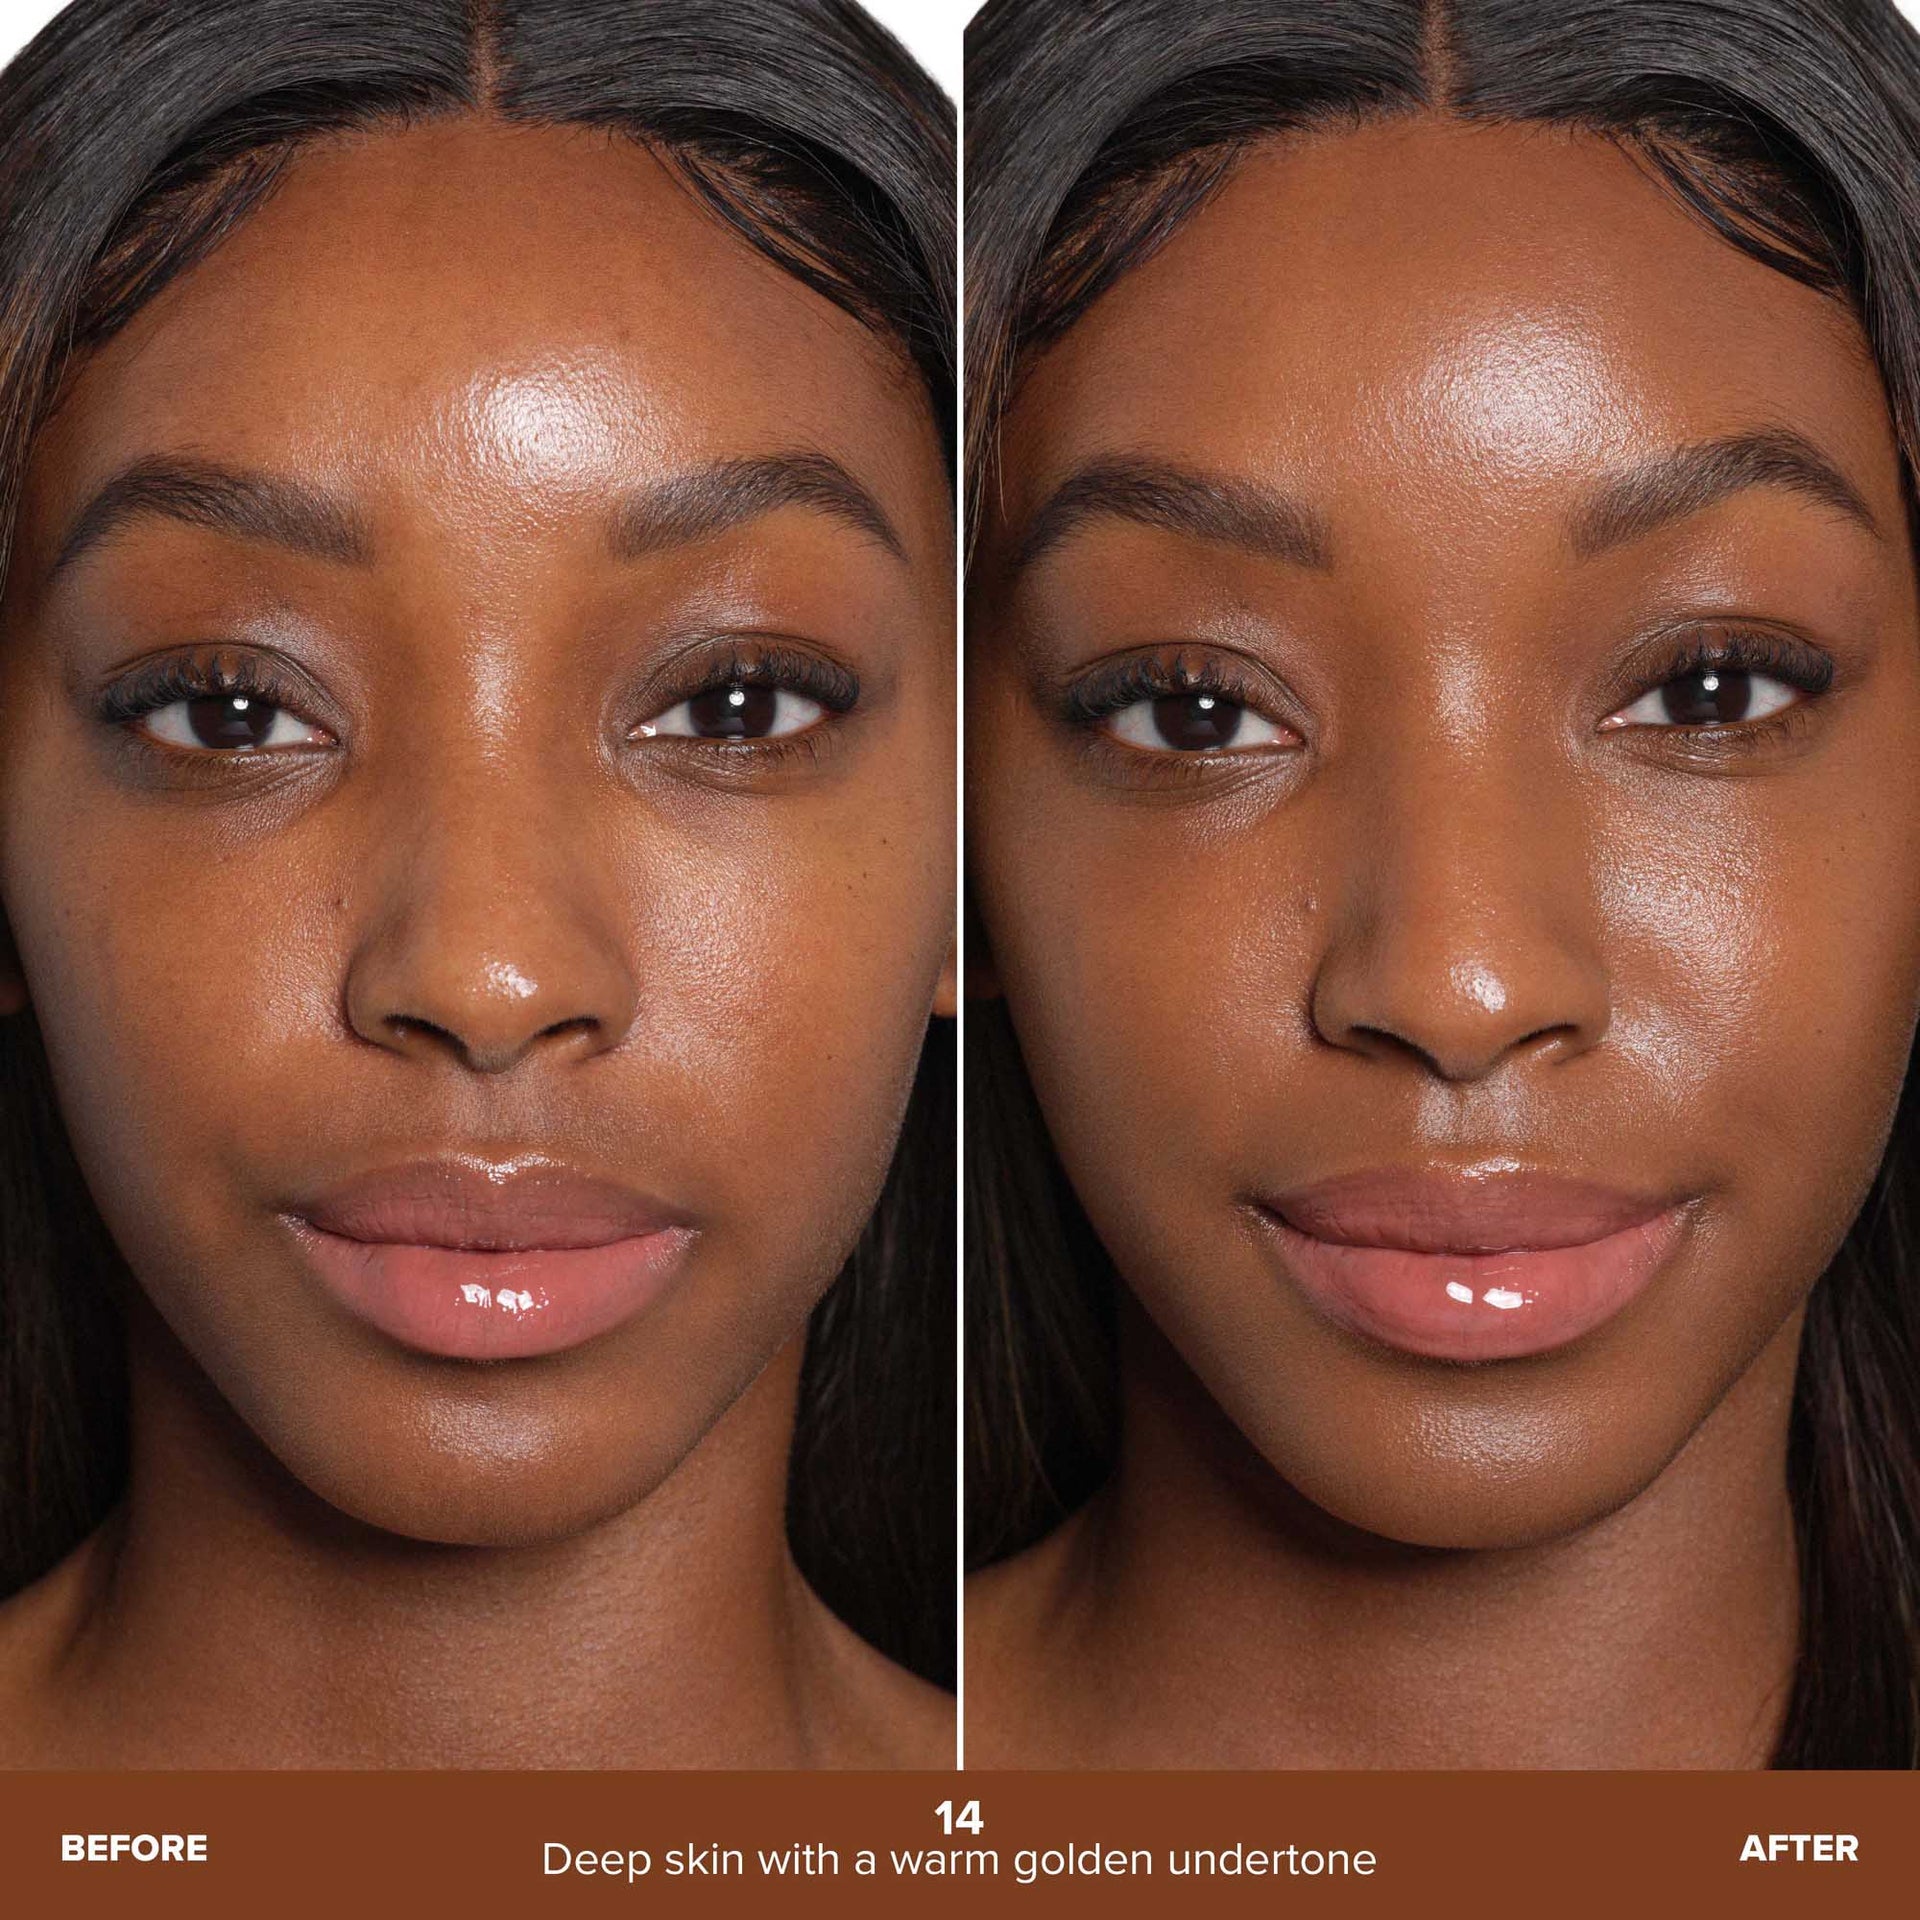 Shade 14 | Beauty Balm Serum Boosted Skin Tint Before & After - Shade 14